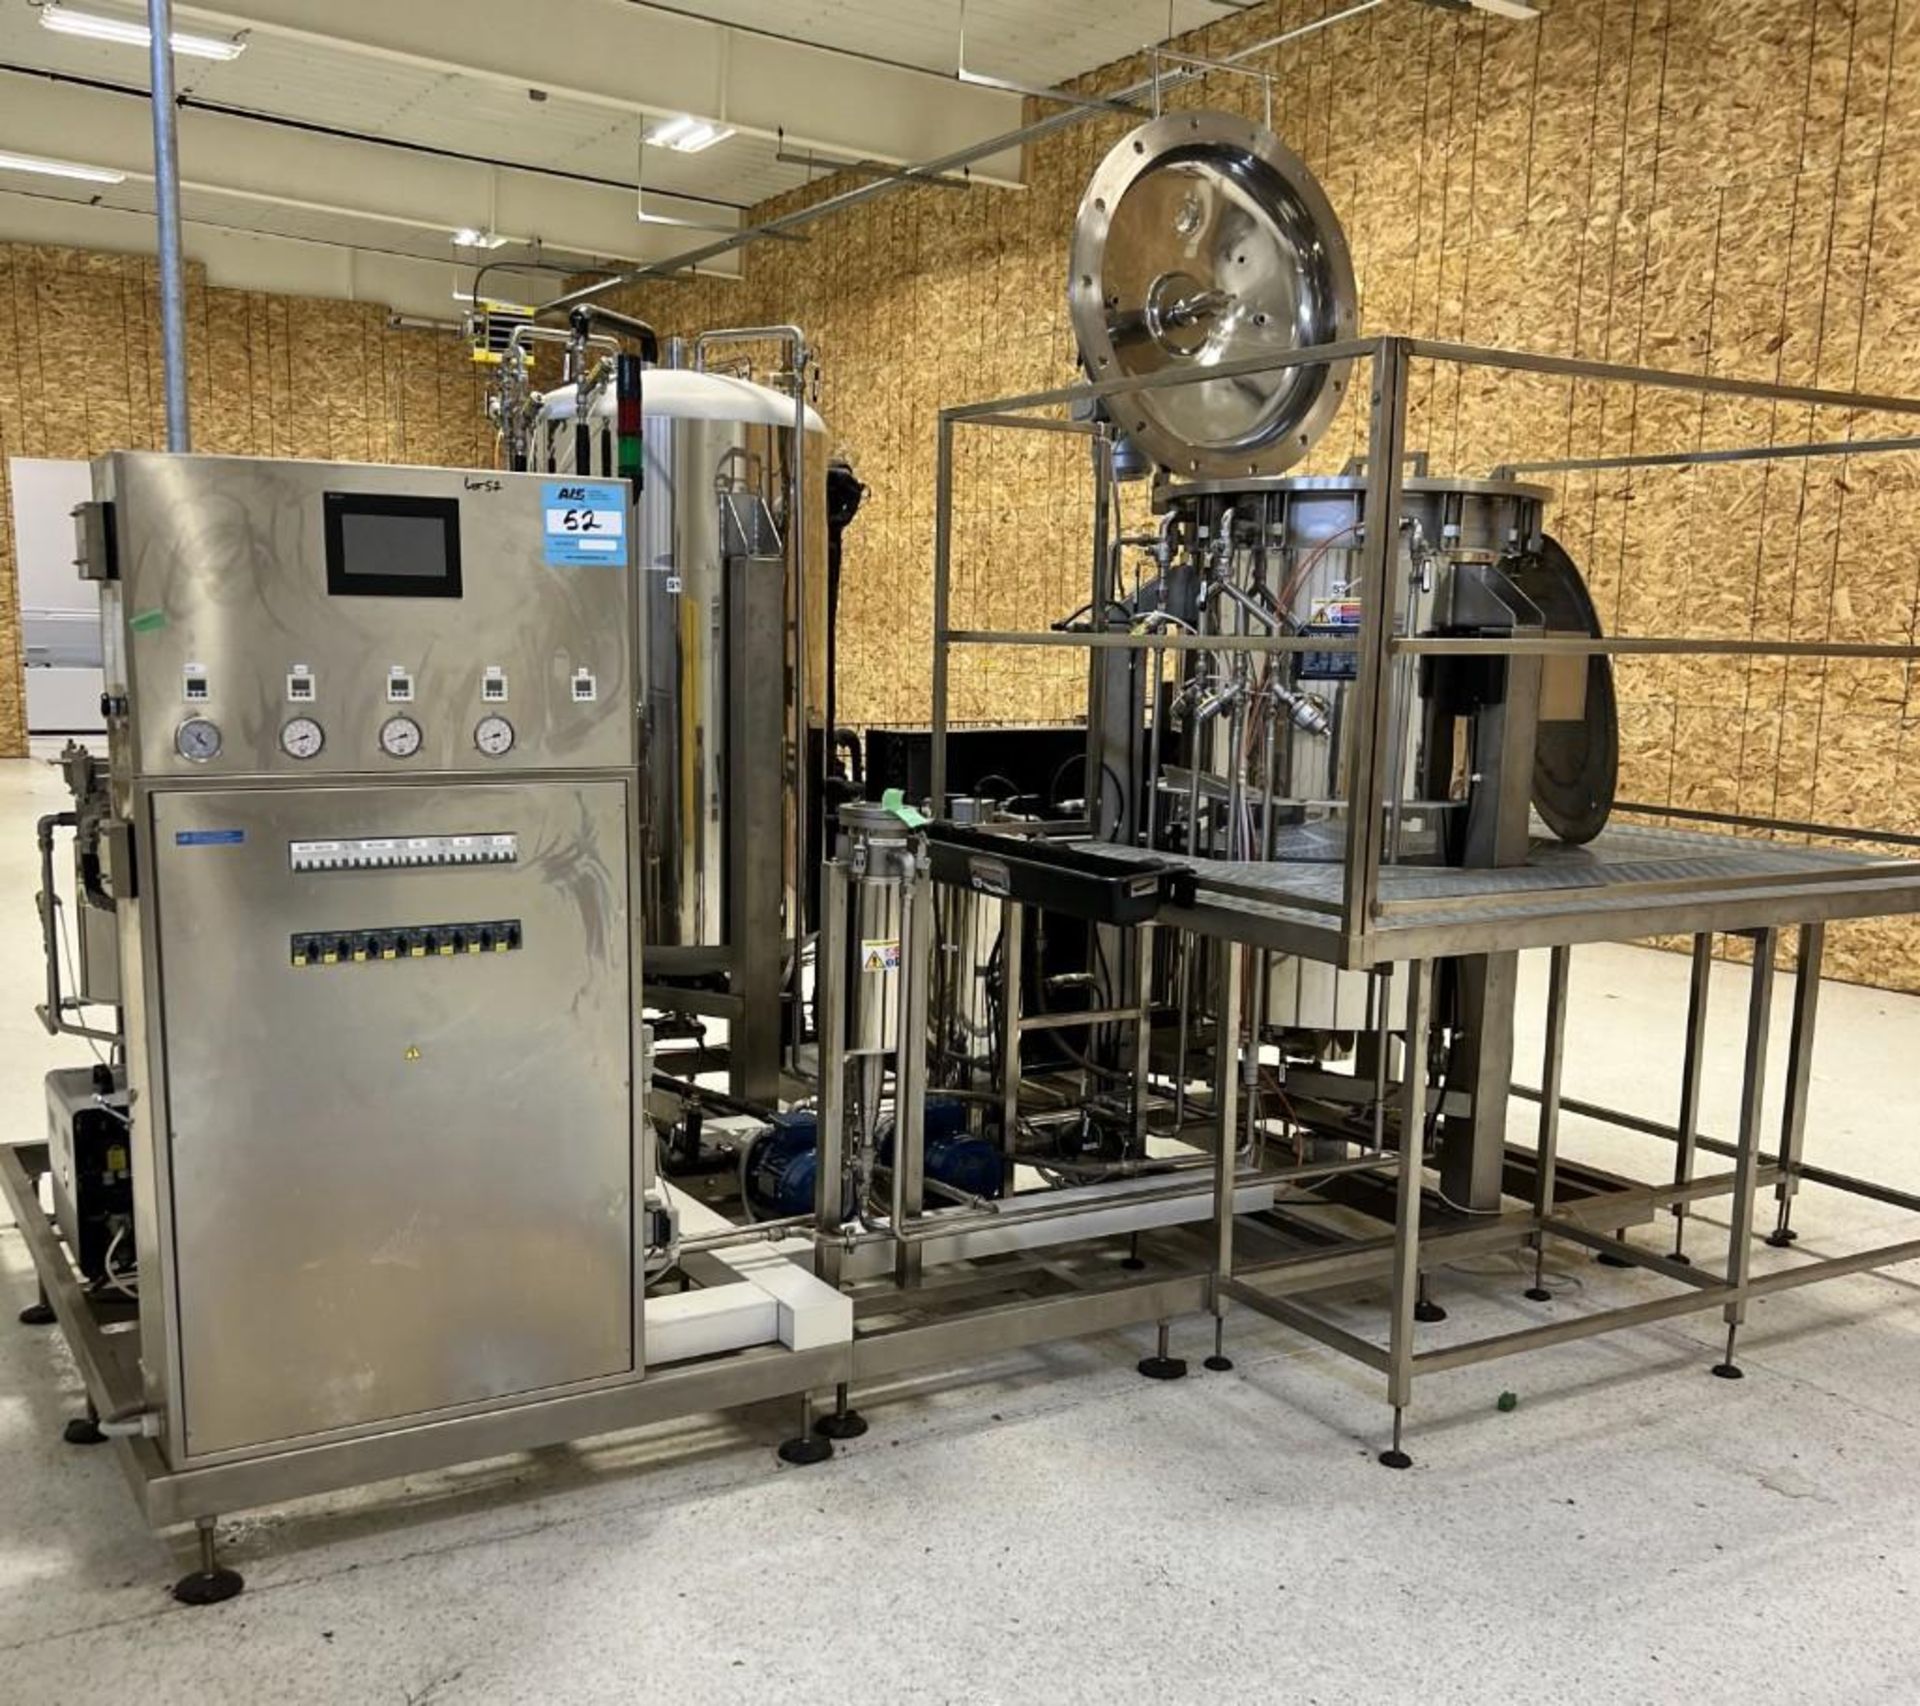 Tecnolab Type Timatic FC Solvent Extraction System, Model FC 500, Serial# ST-050819, Built 08/2019.